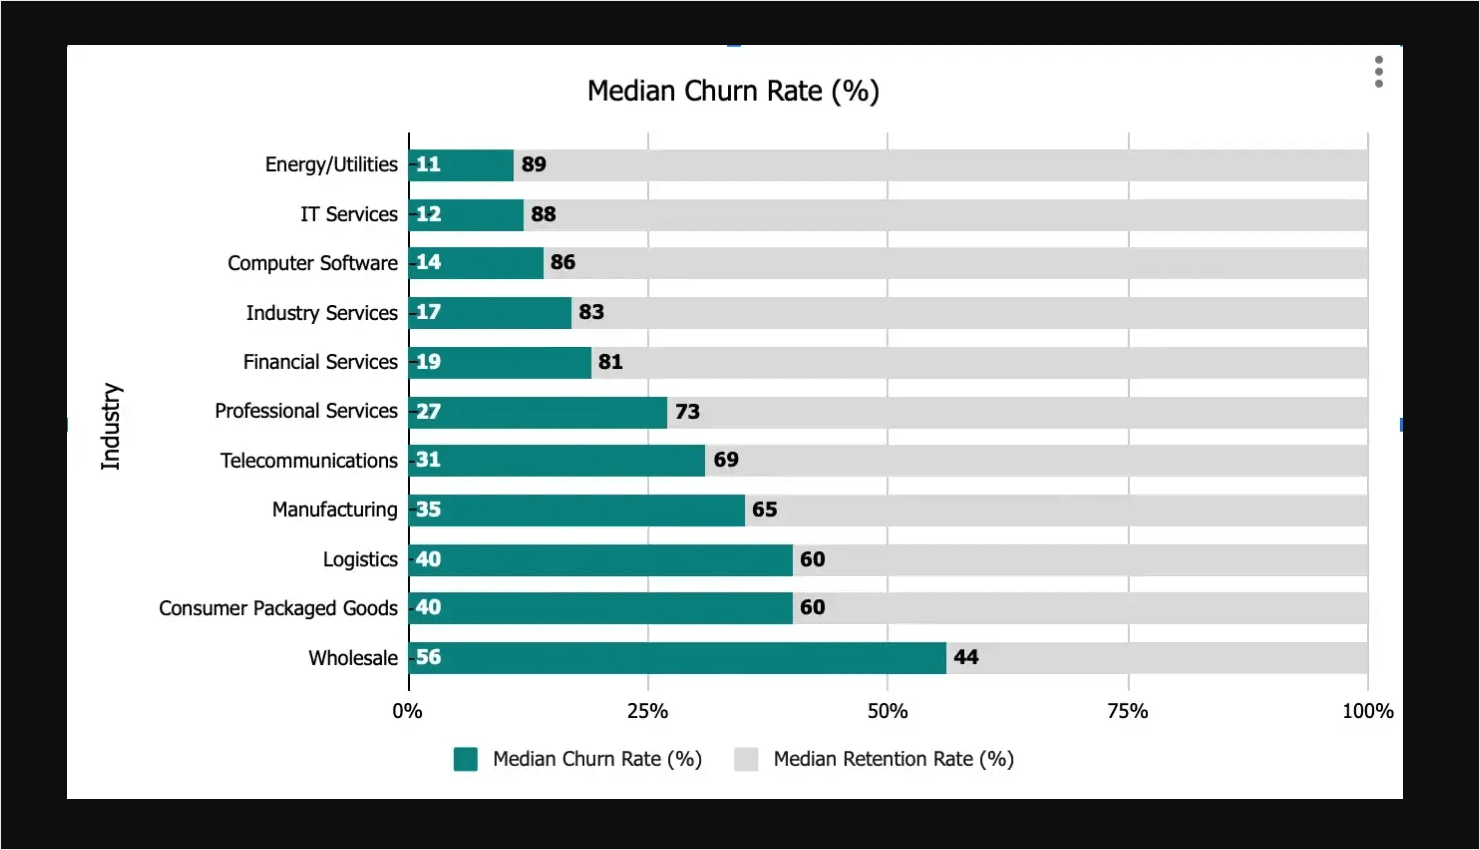 CustomerGauge's bar graph showing the 2022 median churn rates for different B2B industries